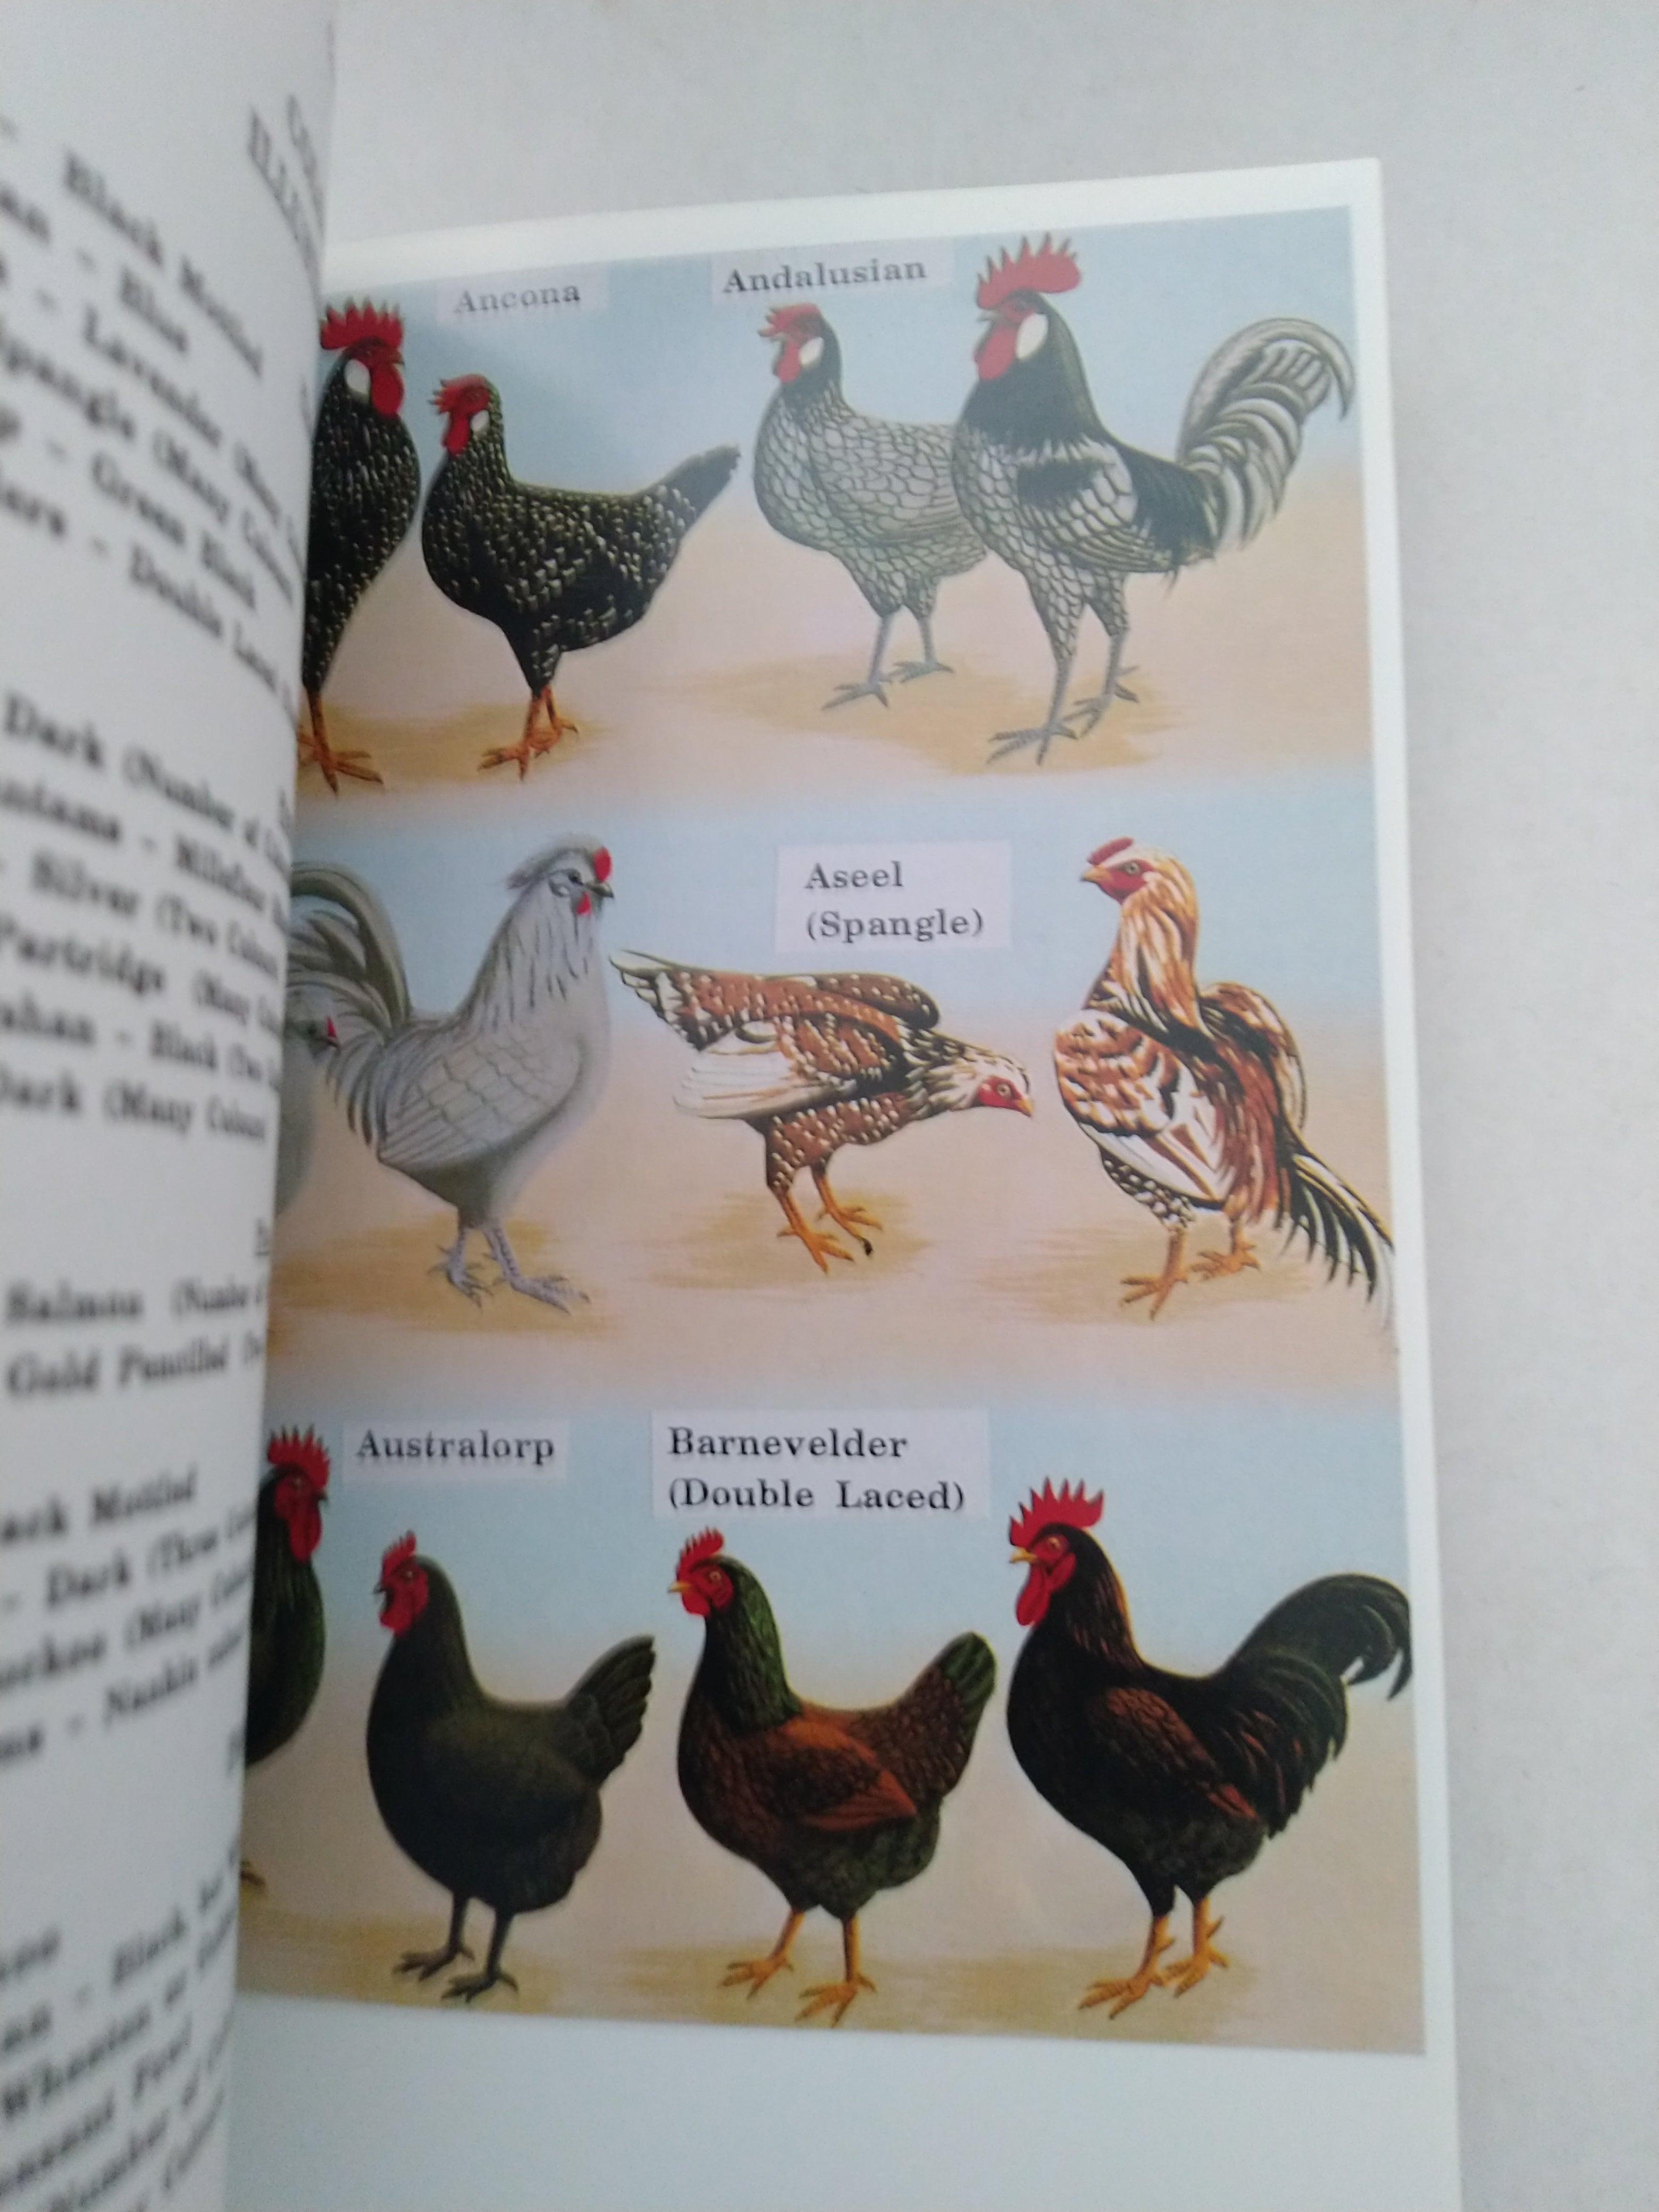 A Concise Poultry Colour Guide (International Poultry Library) by Dr. Joseph Batty